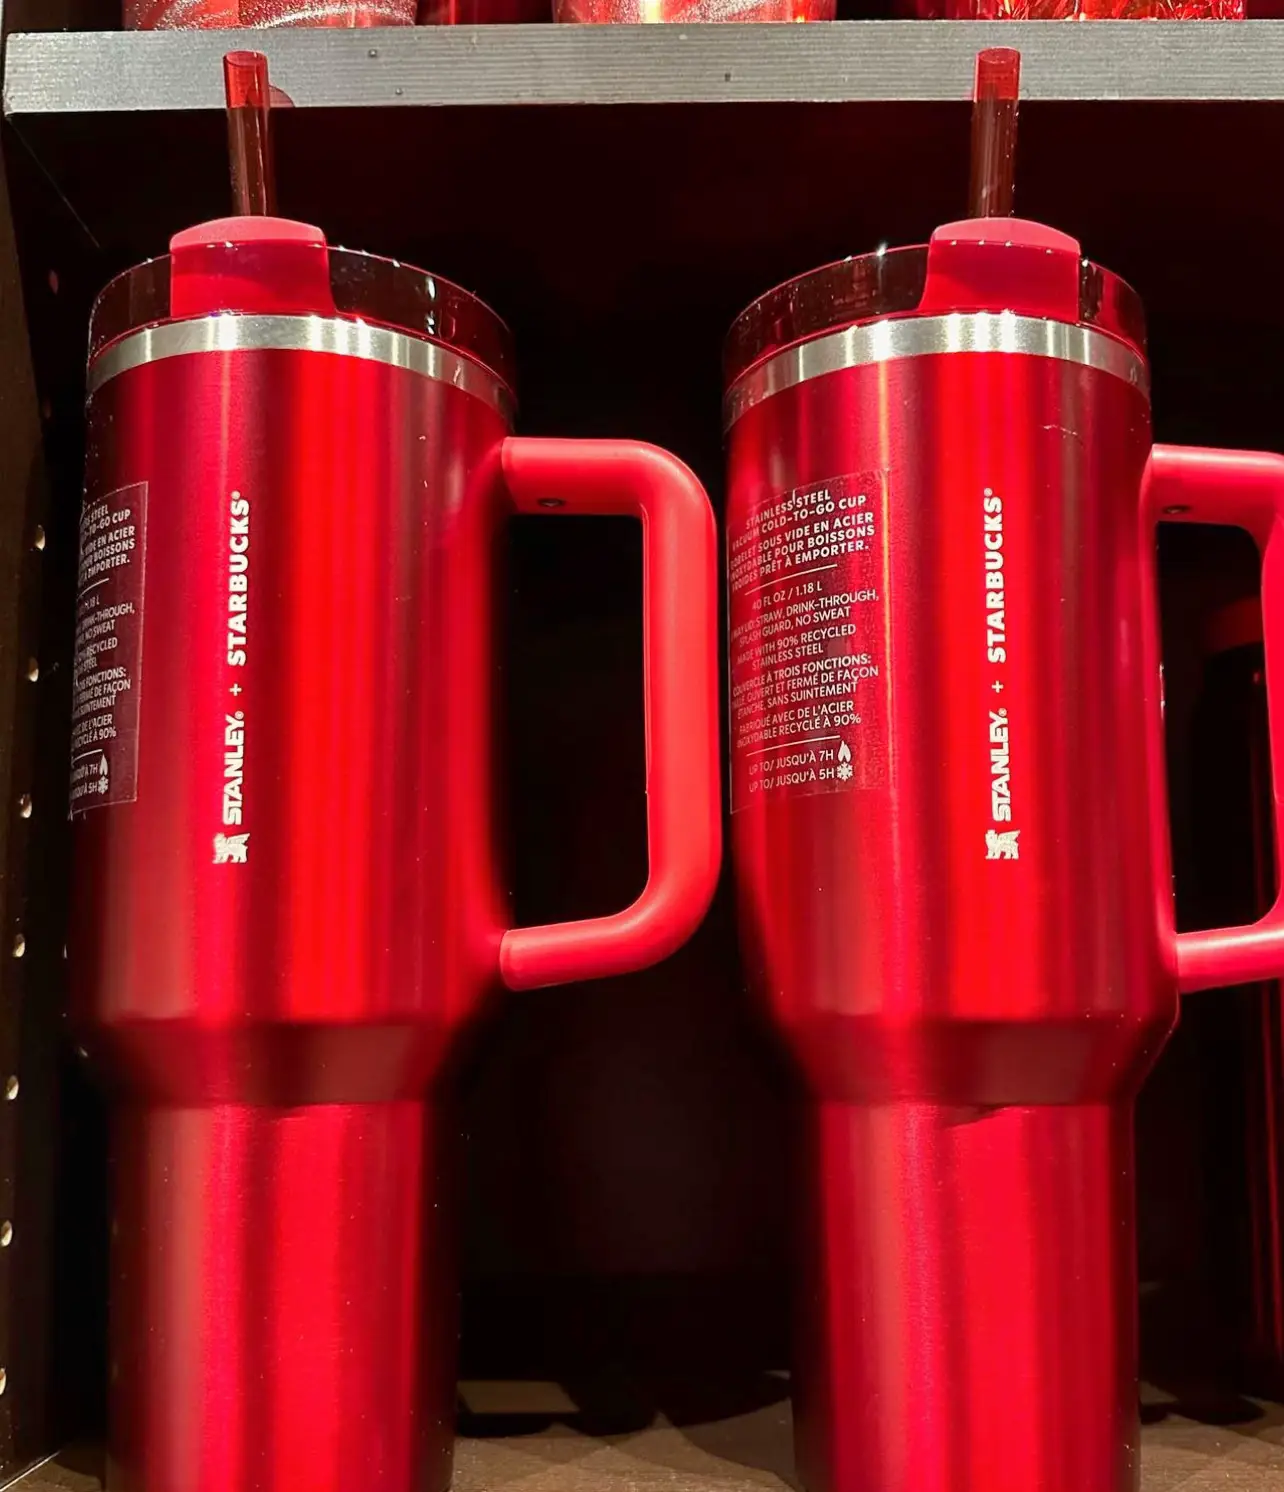 Pink Stanley cup craze at Starbucks and Target, explained: Why